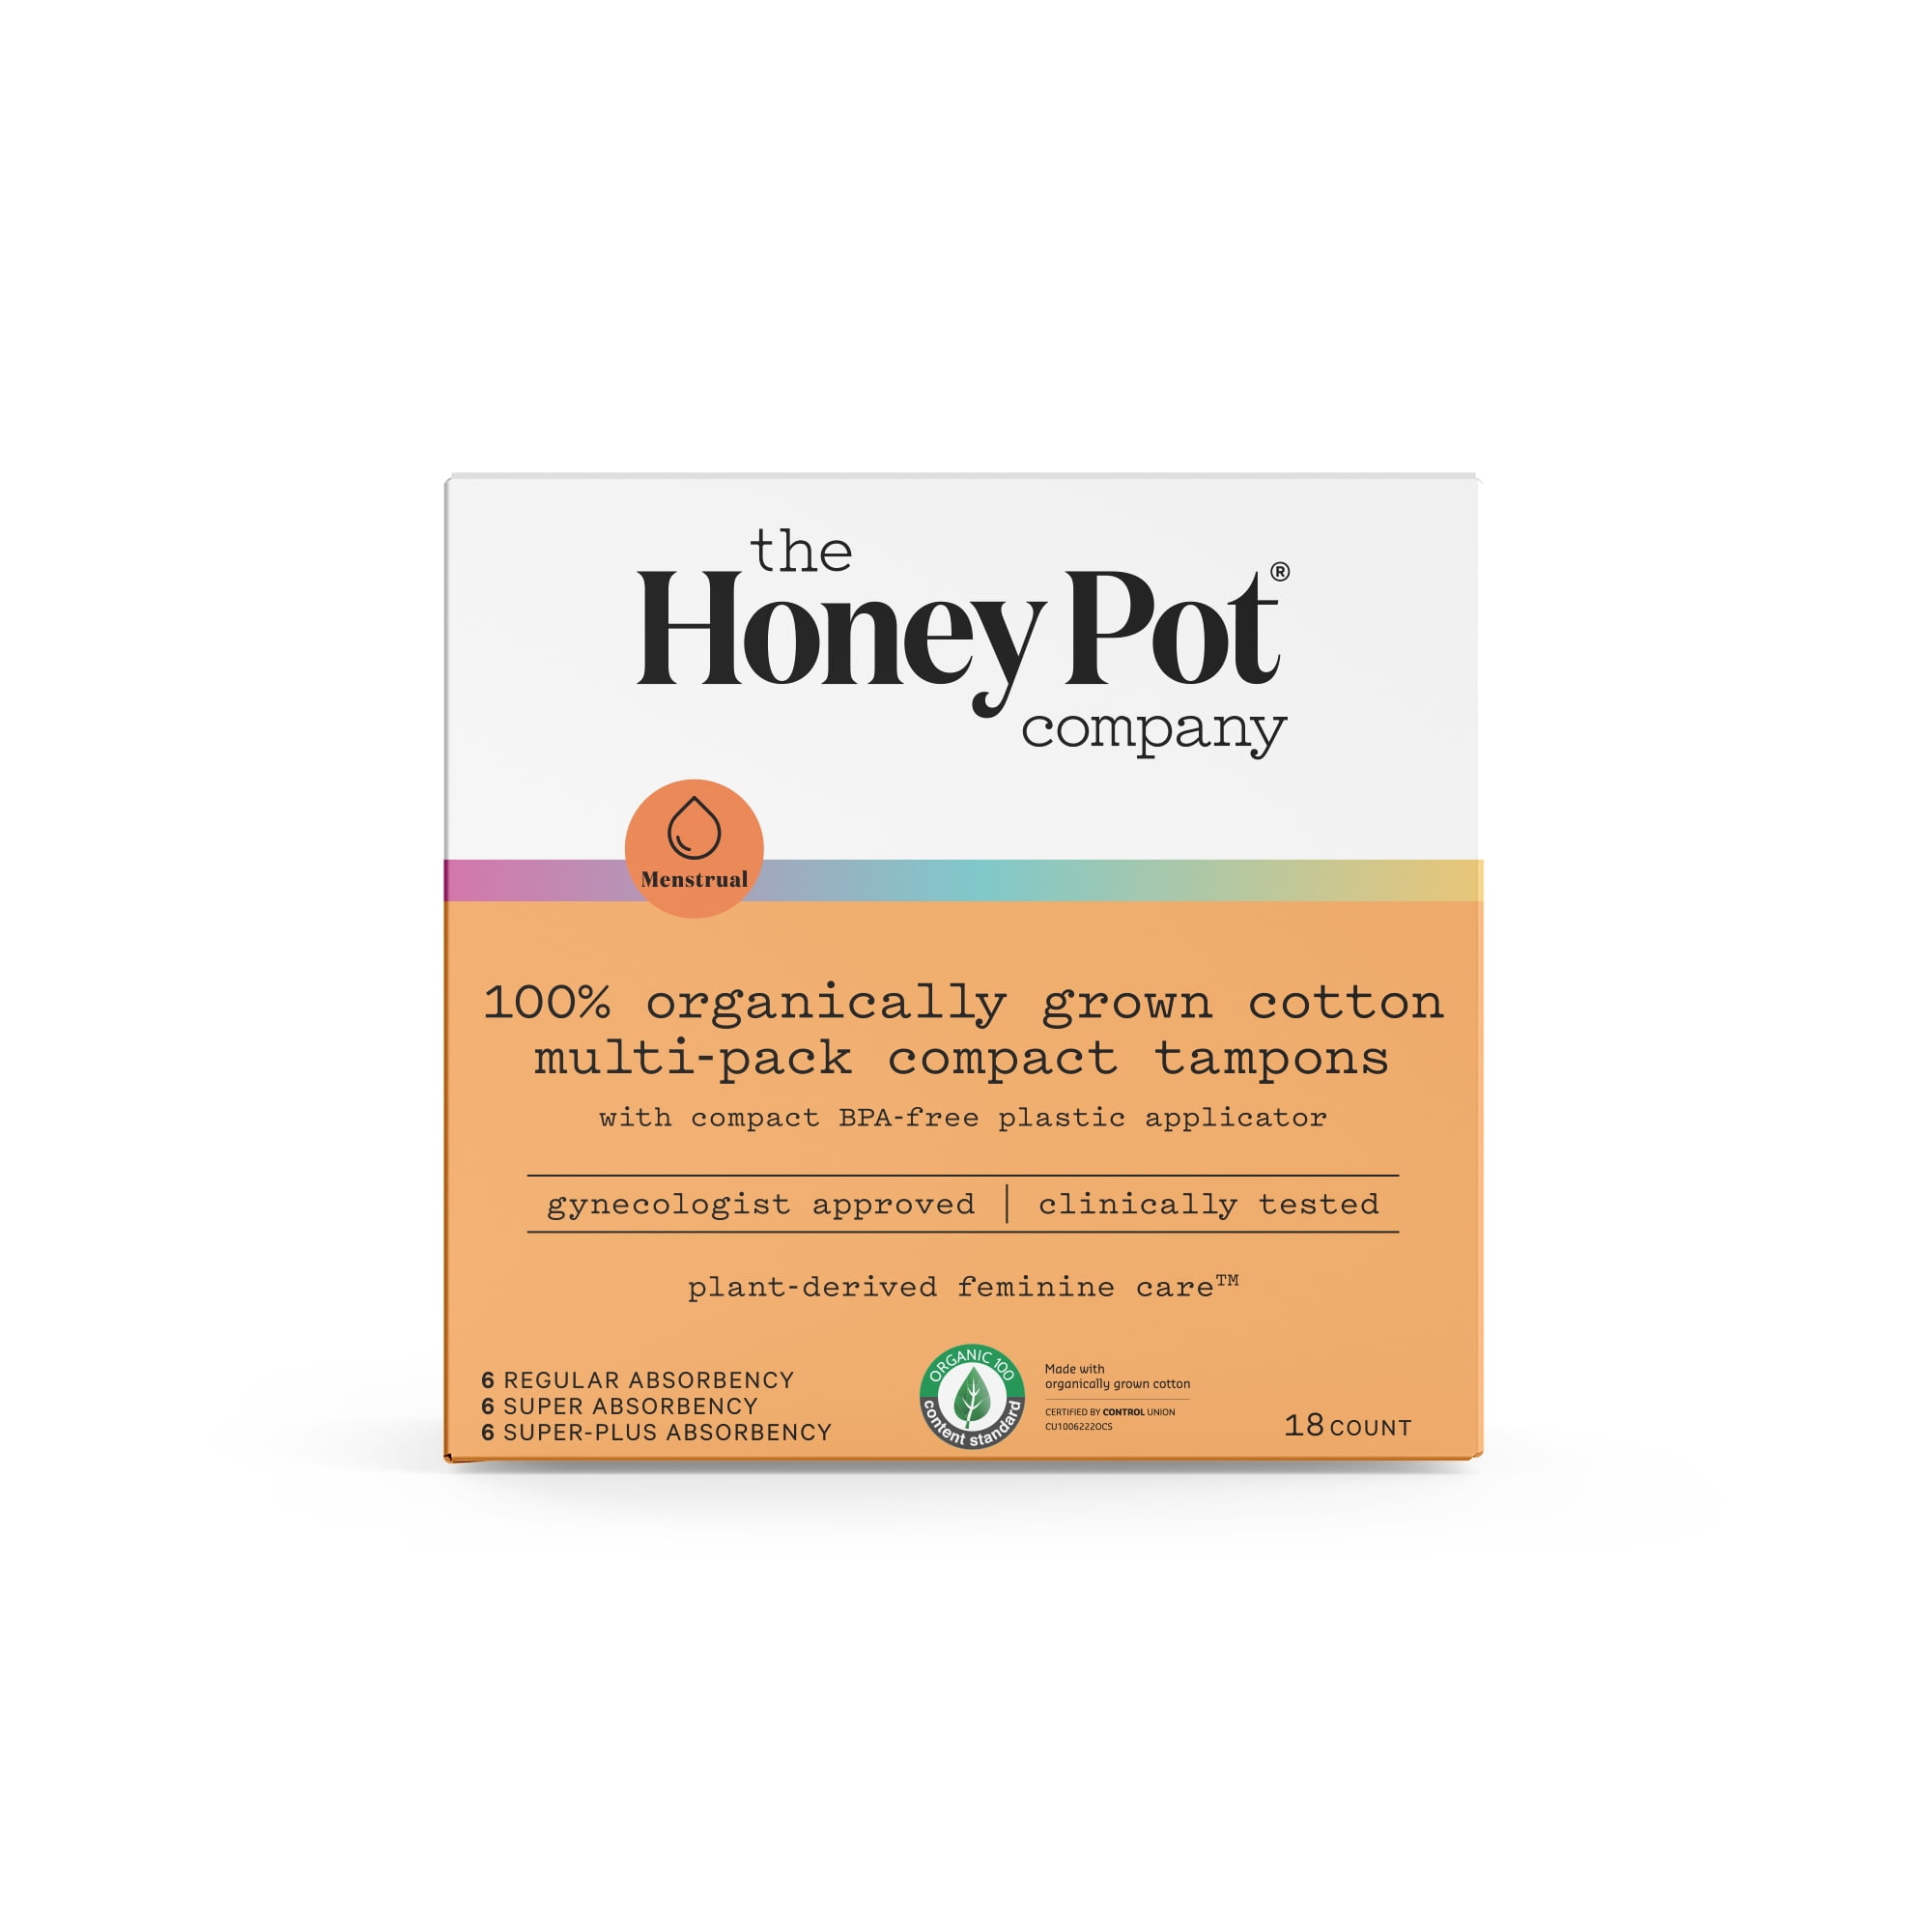 The Honey Pot Company, Organic Cotton Multi-Pack Compact Tampons, 18 ct. 